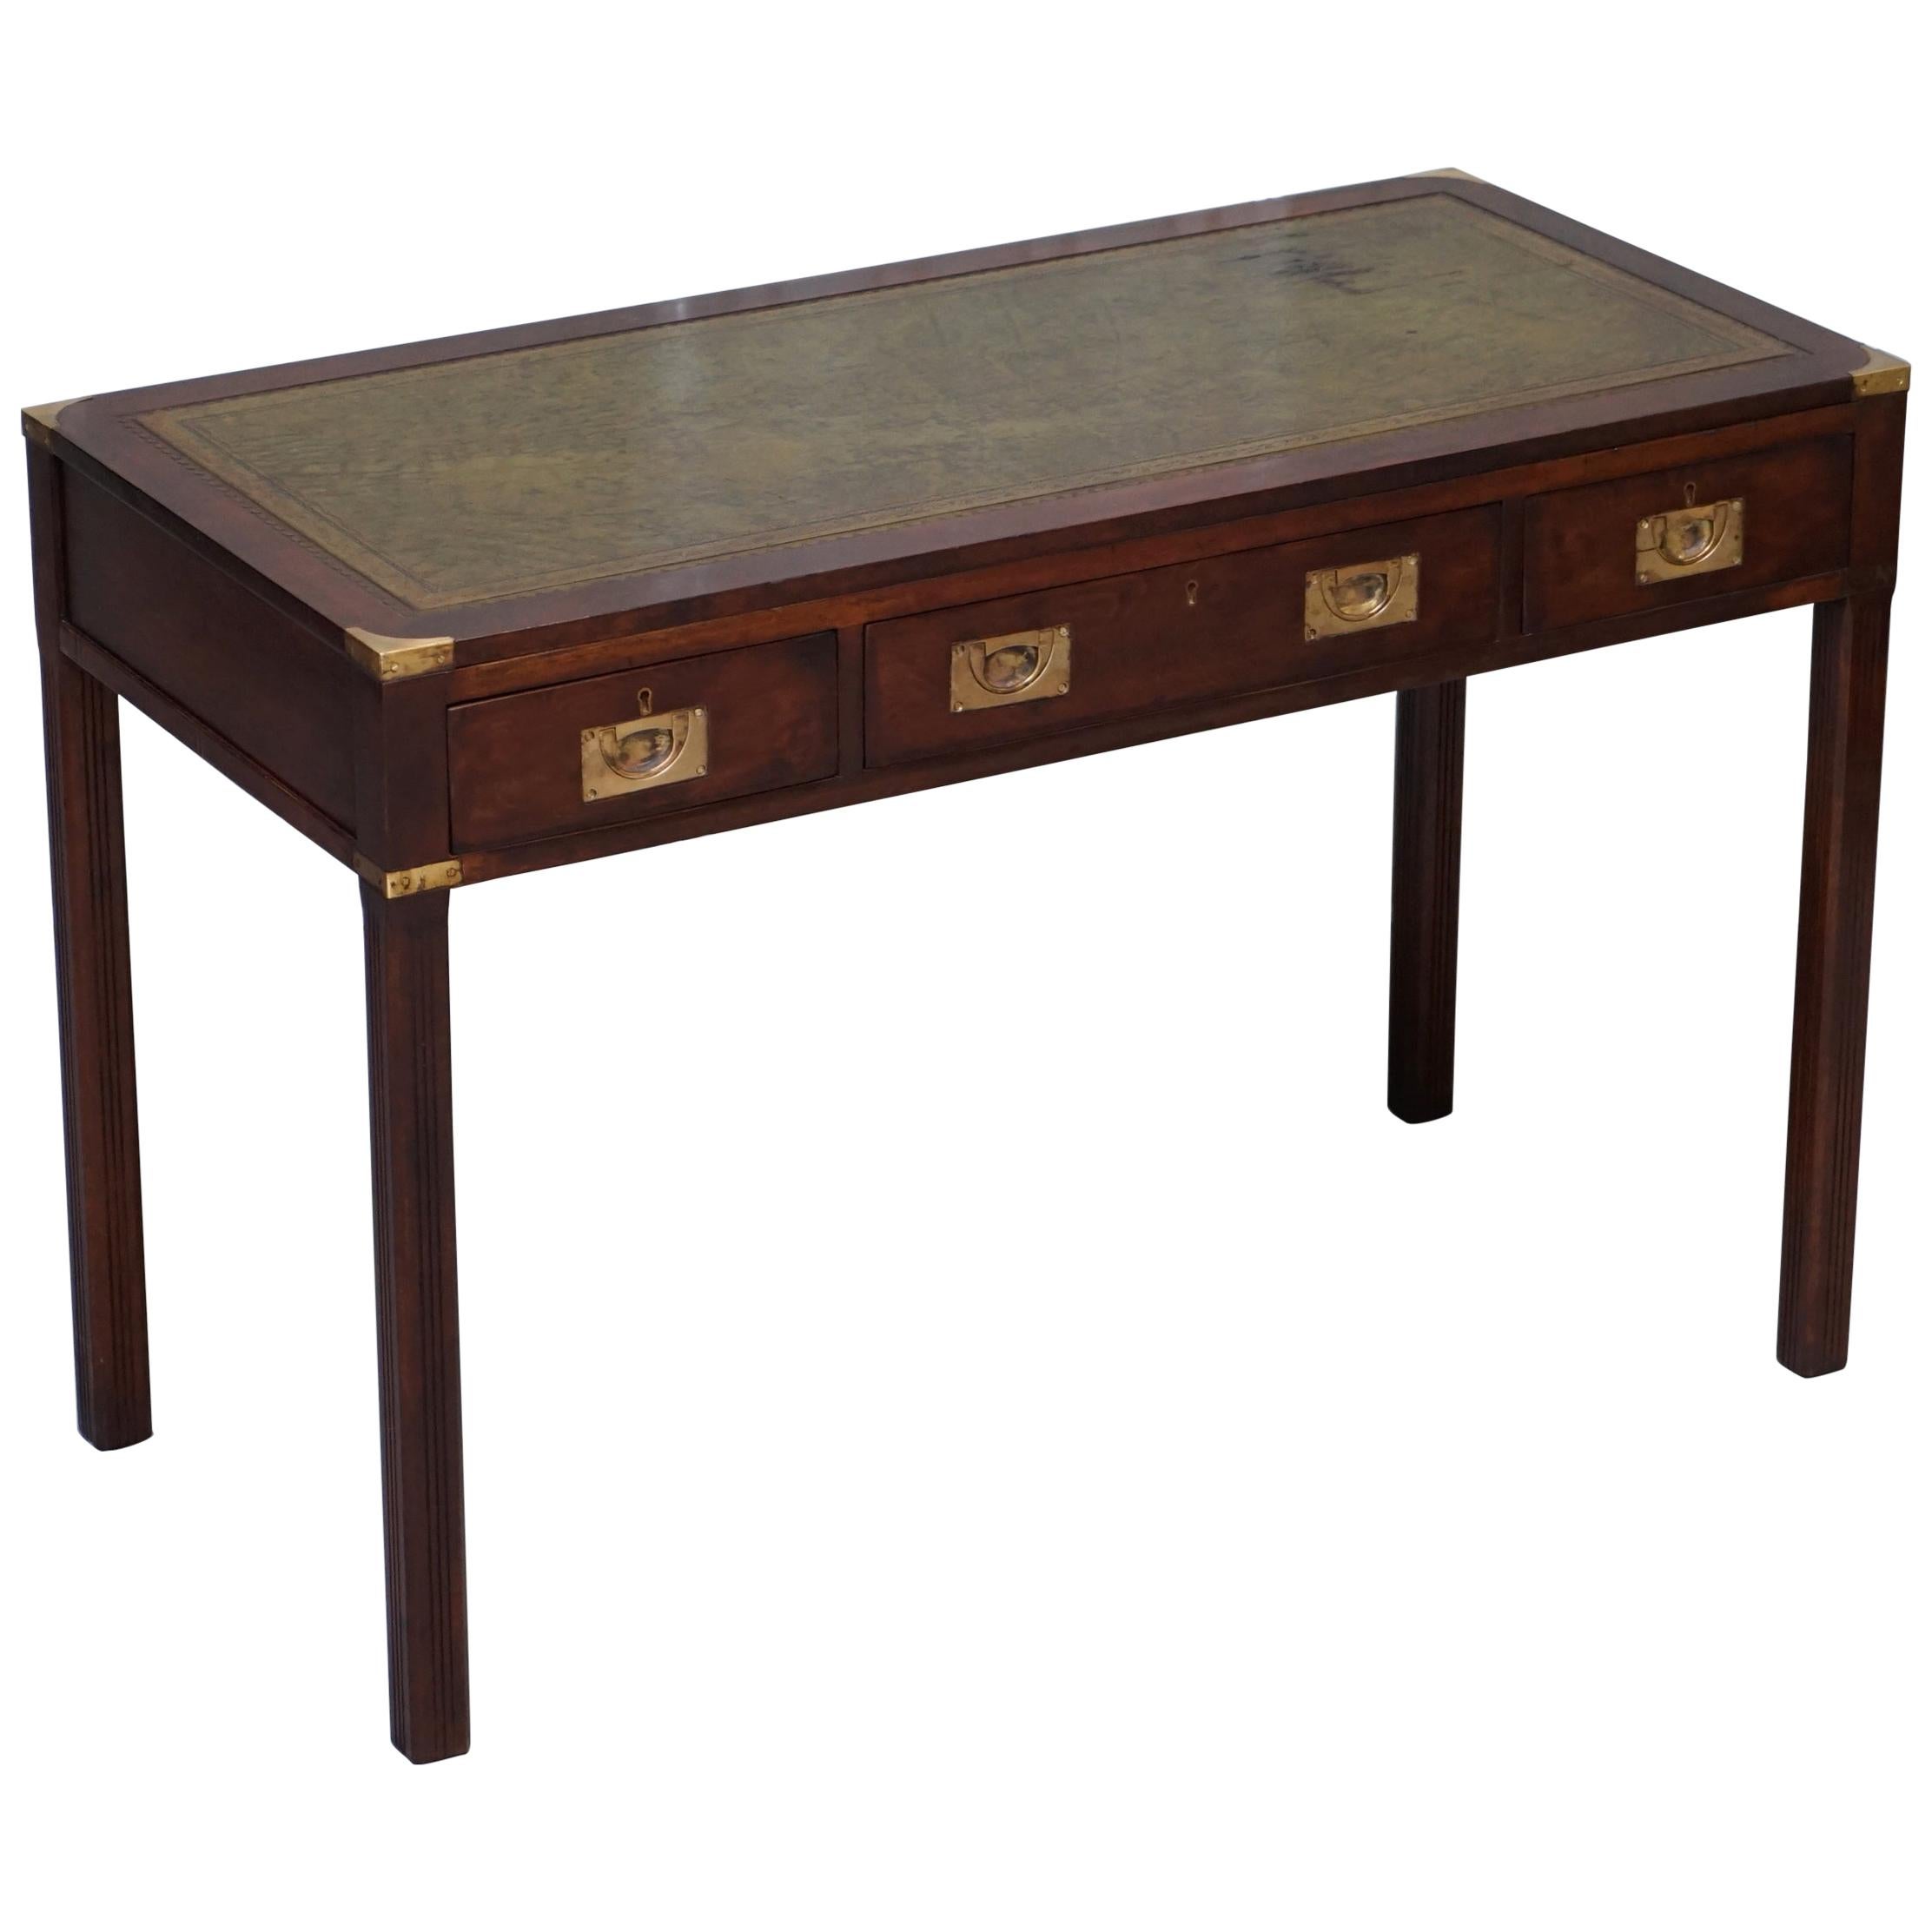 Kennedy Harrods London Mahogany Leather Military Campaign Writing Table Desk